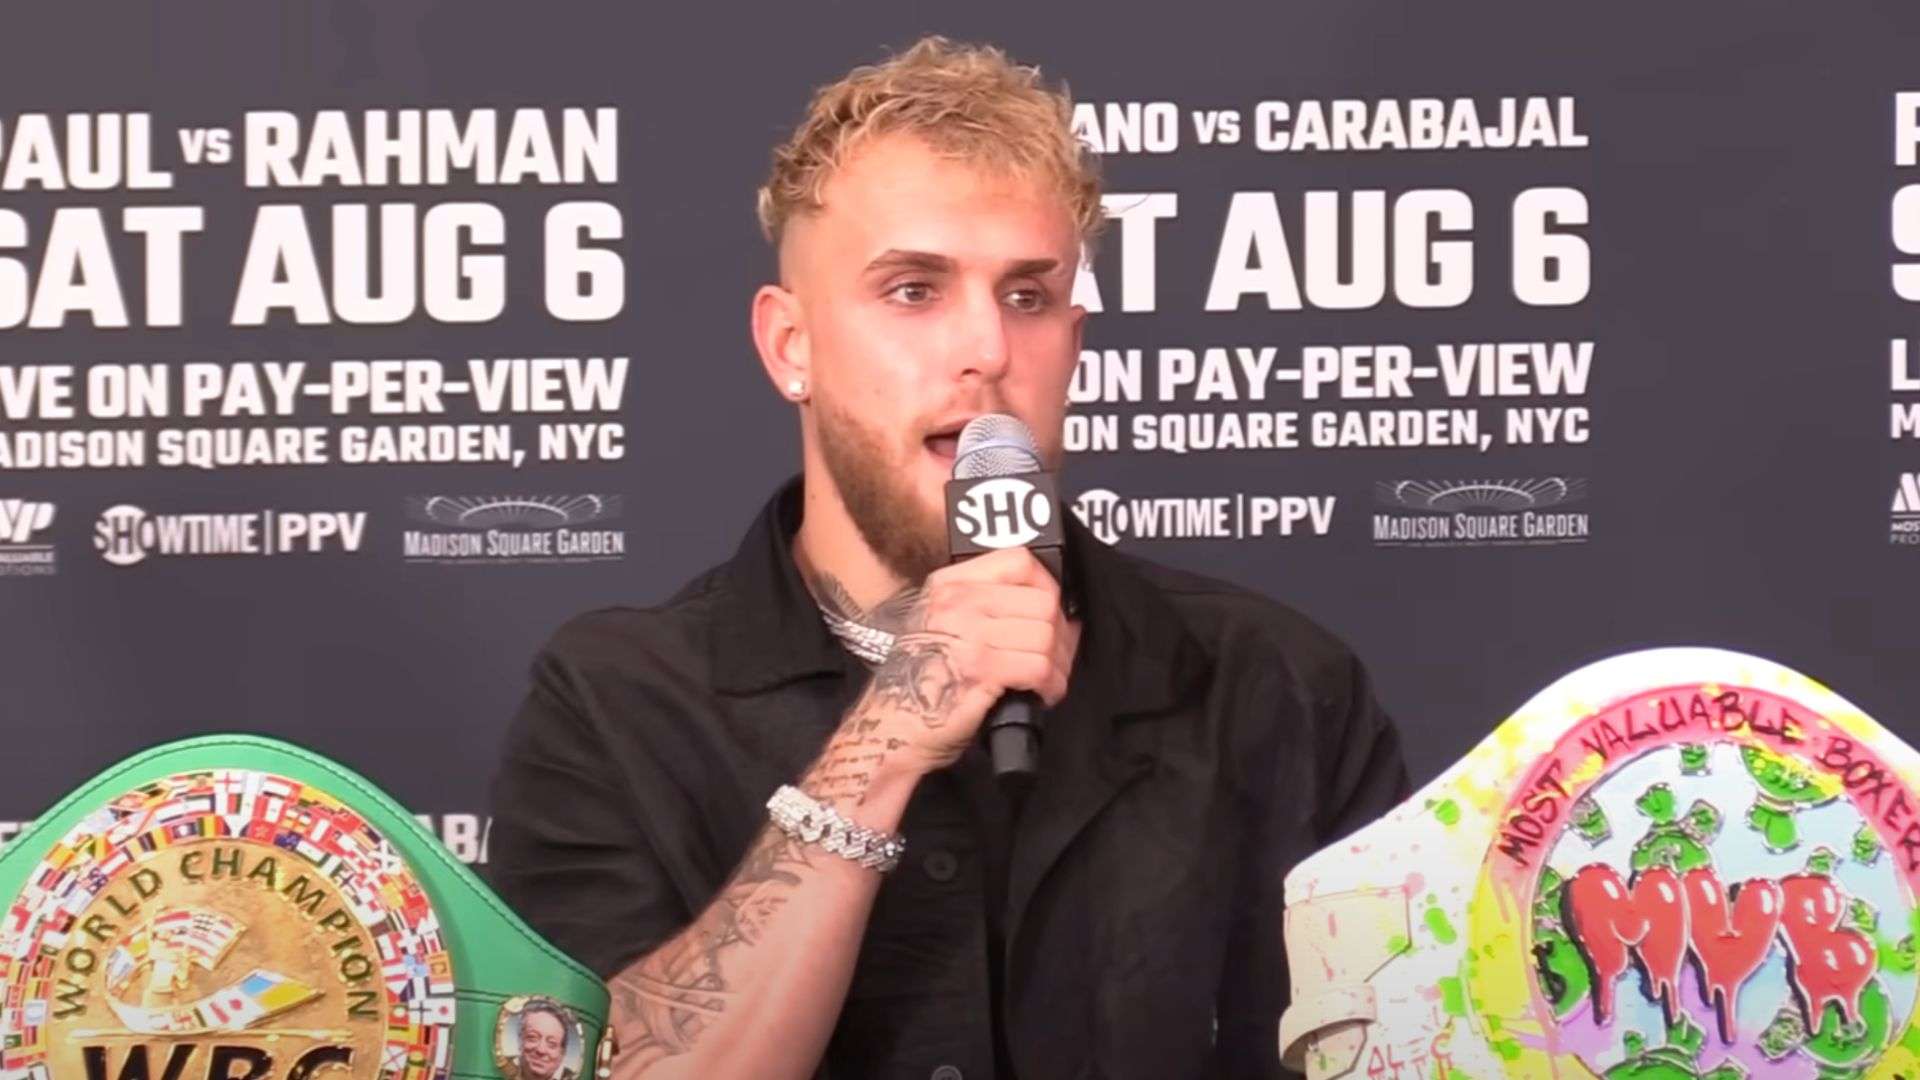 Jake Paul holding mic at press conference surronded by boxing belts